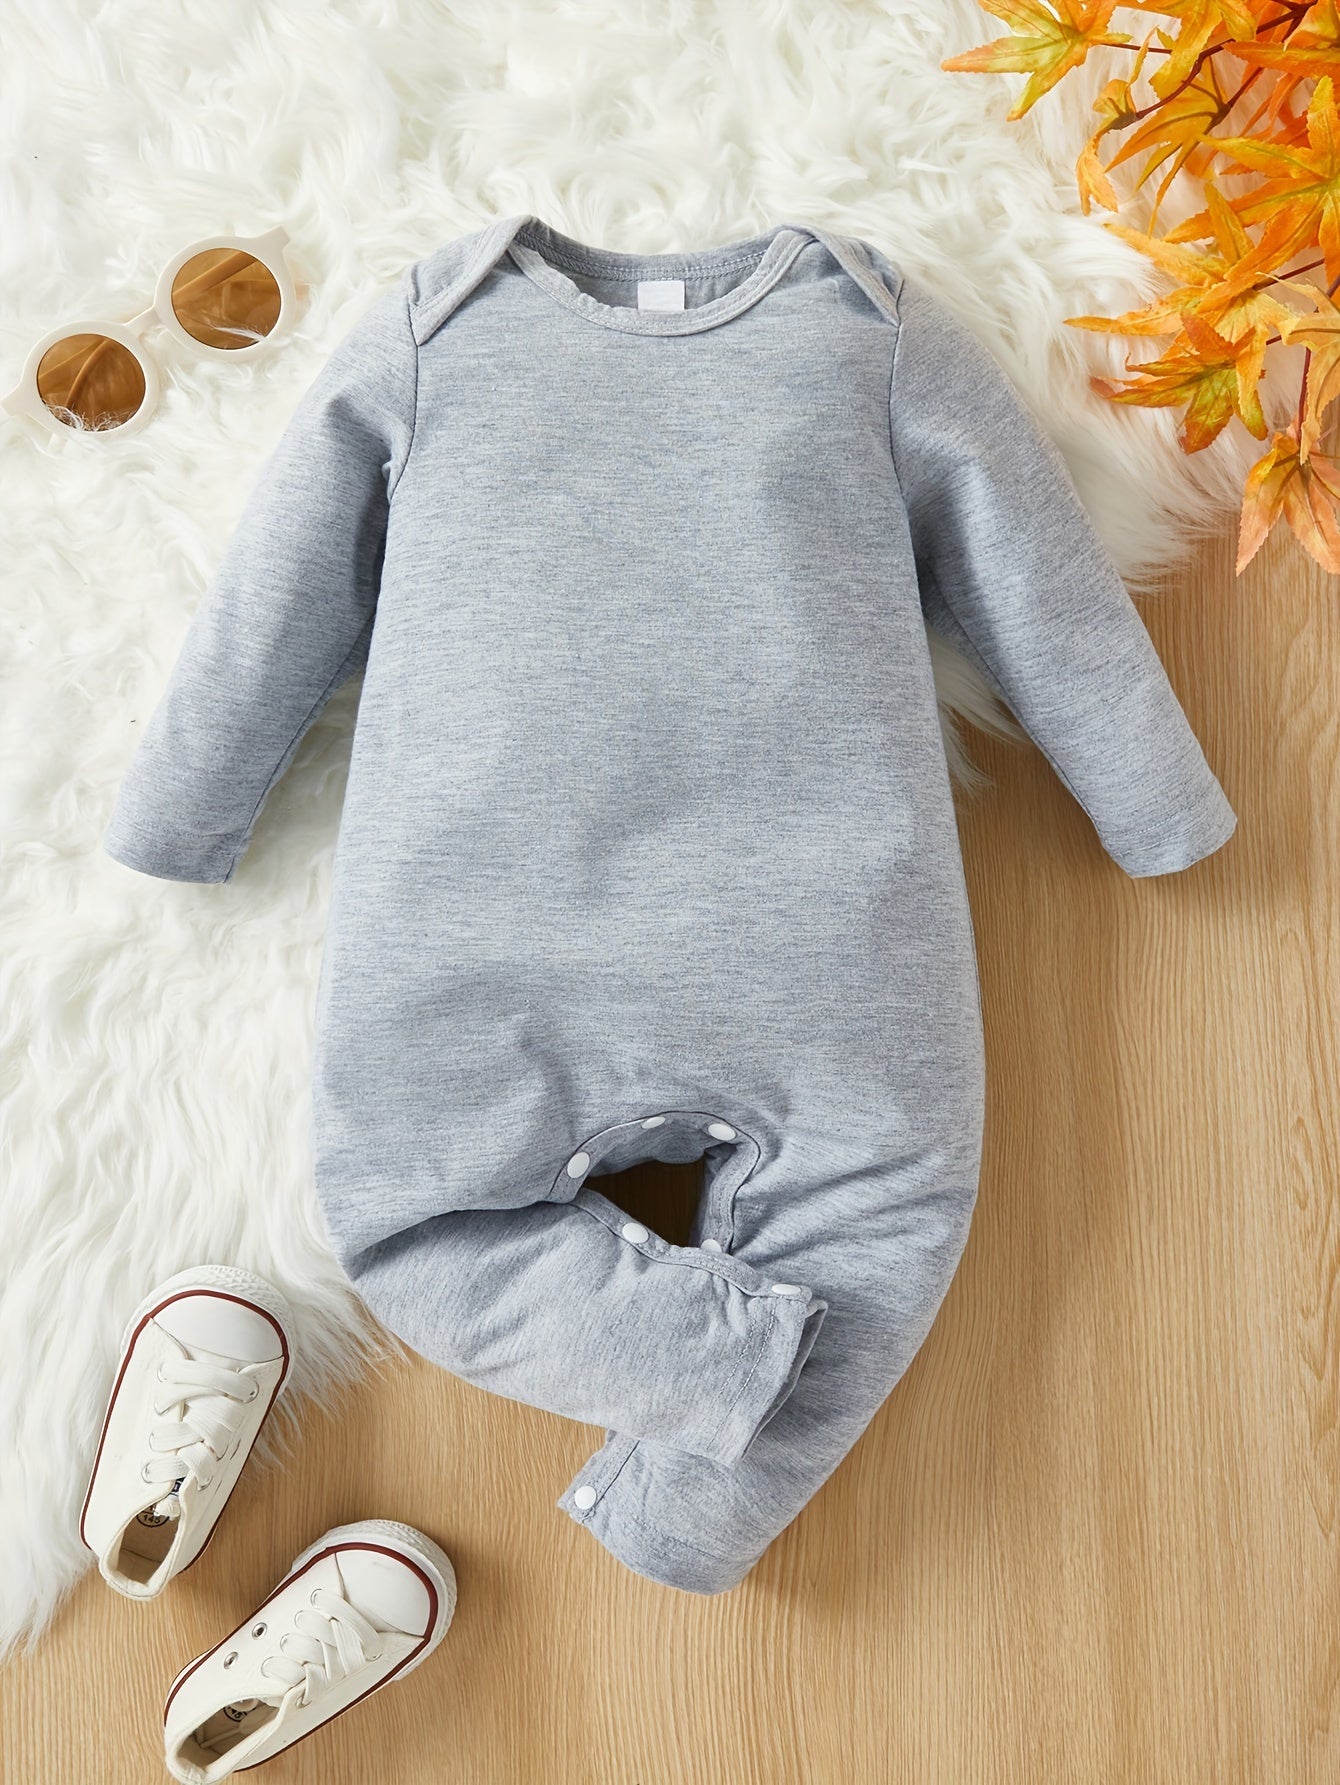 Baby Toddler's Basic Romper, Long Sleeve Casual Triangle Jumpsuit